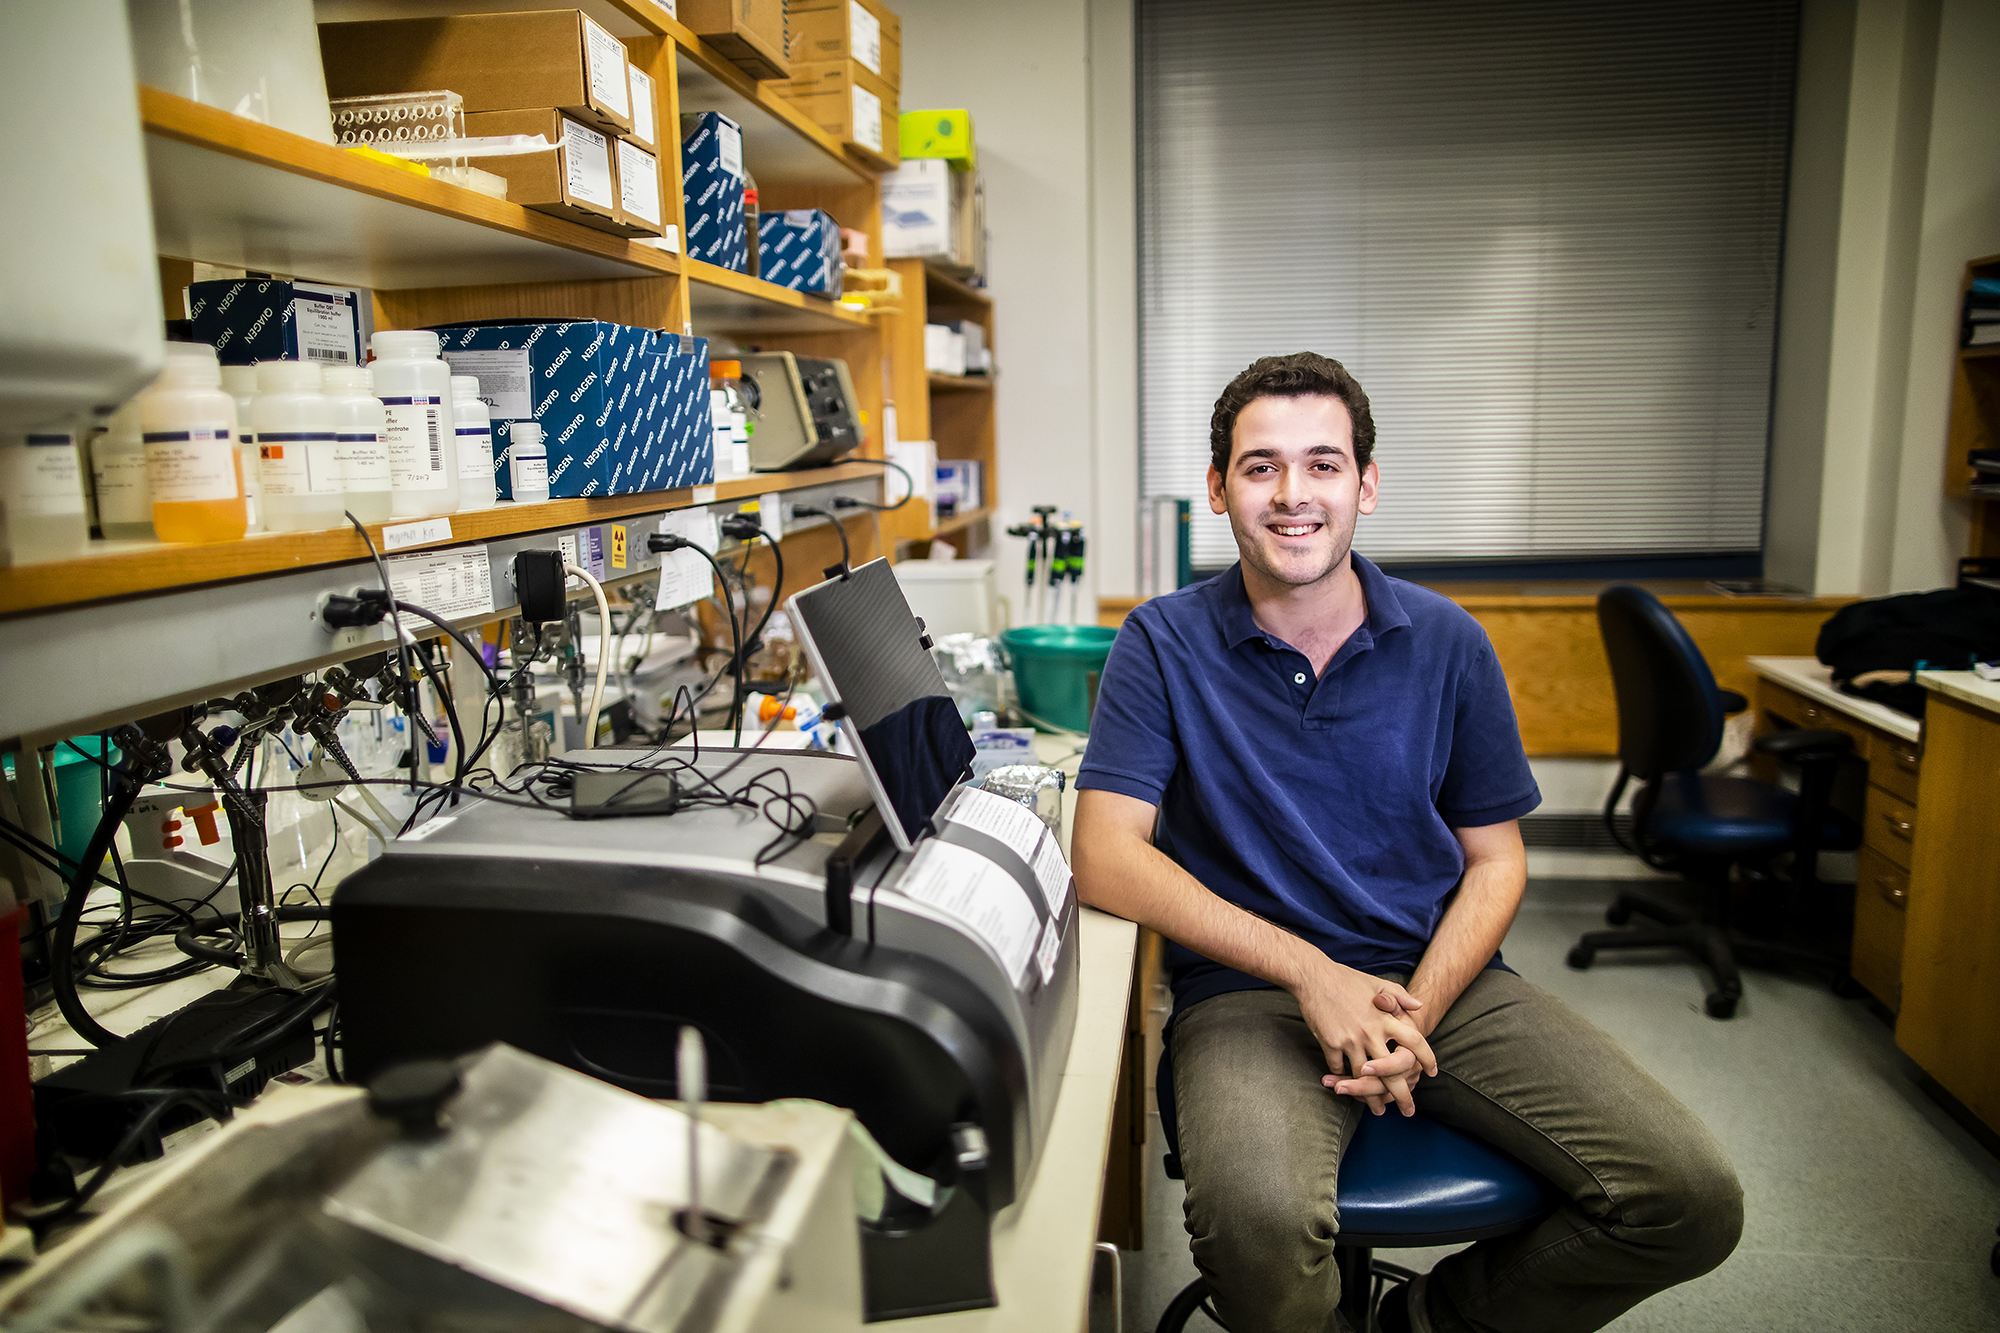 Penn senior Andrew Ravaschiere seated in a lab surrounded by equipment